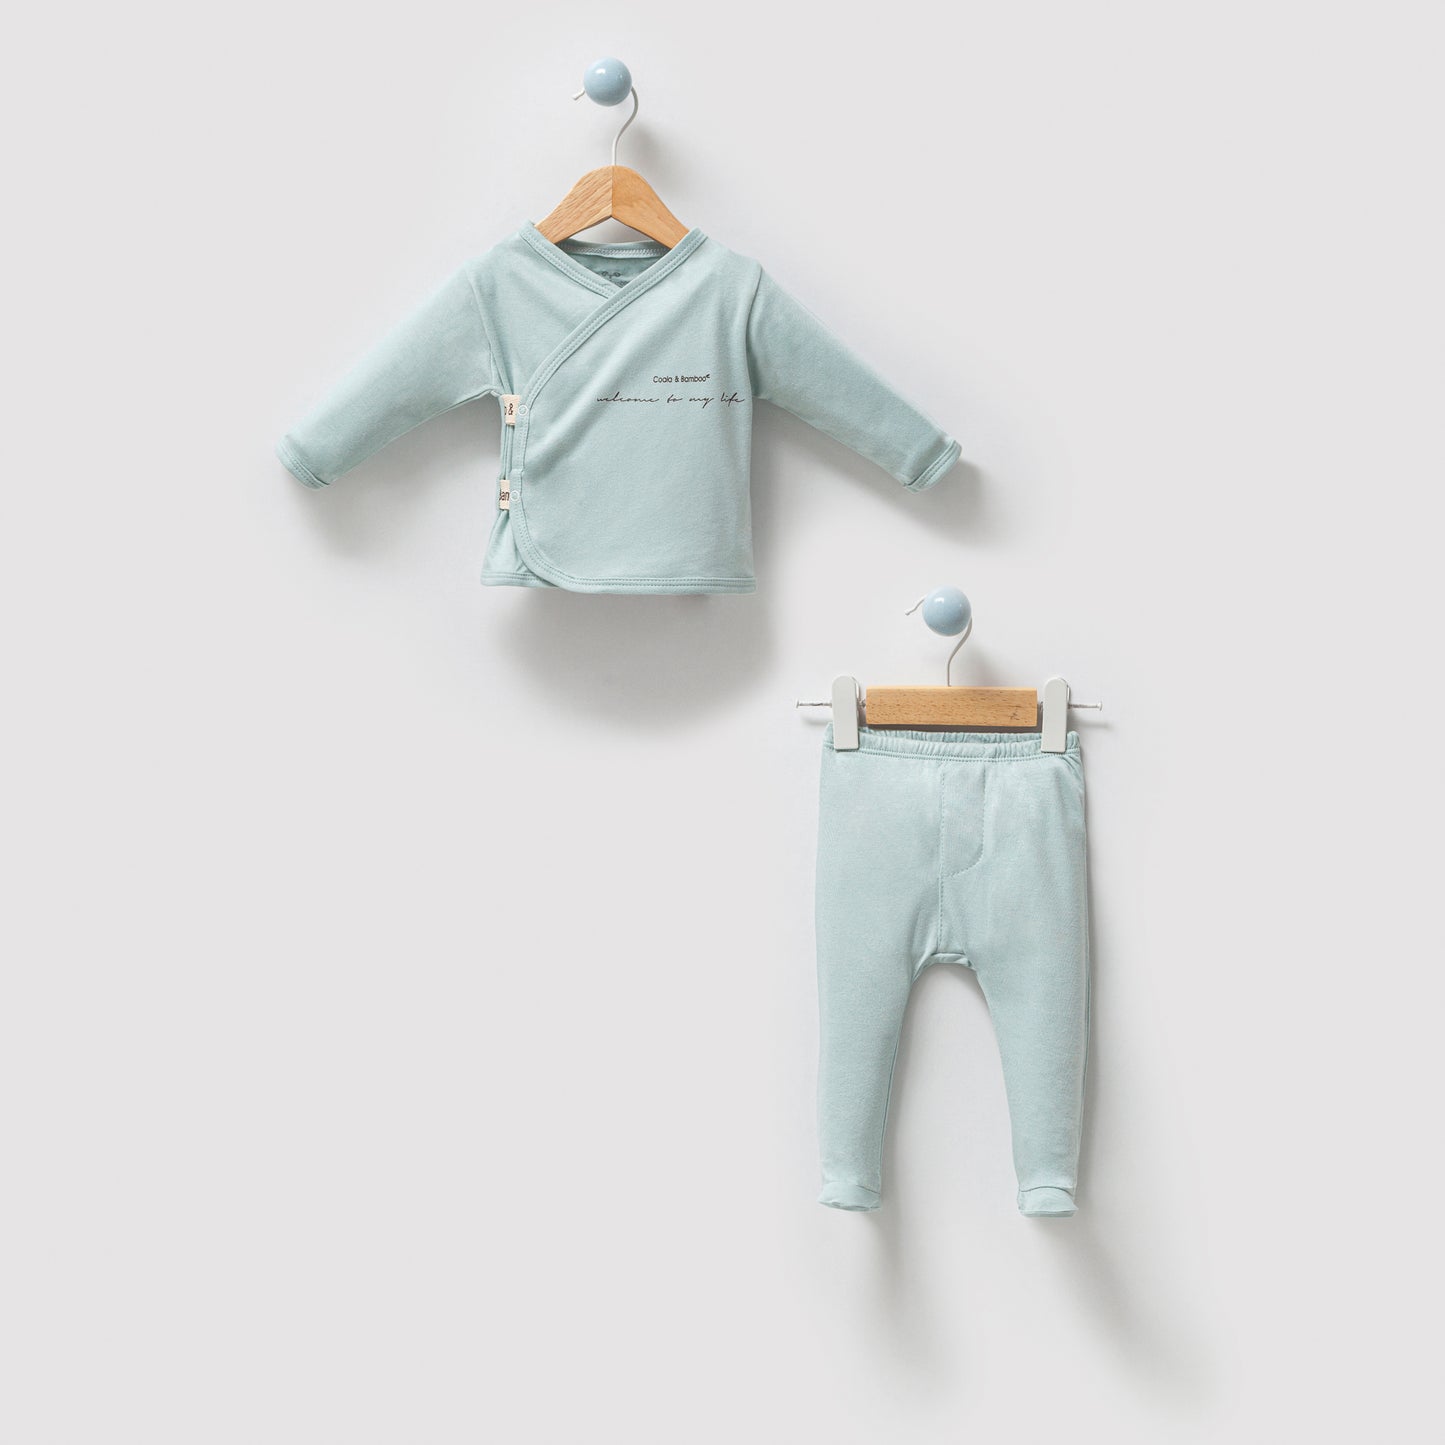 Baby Bodysuit Set Aged 0-3 Months- colored Mint